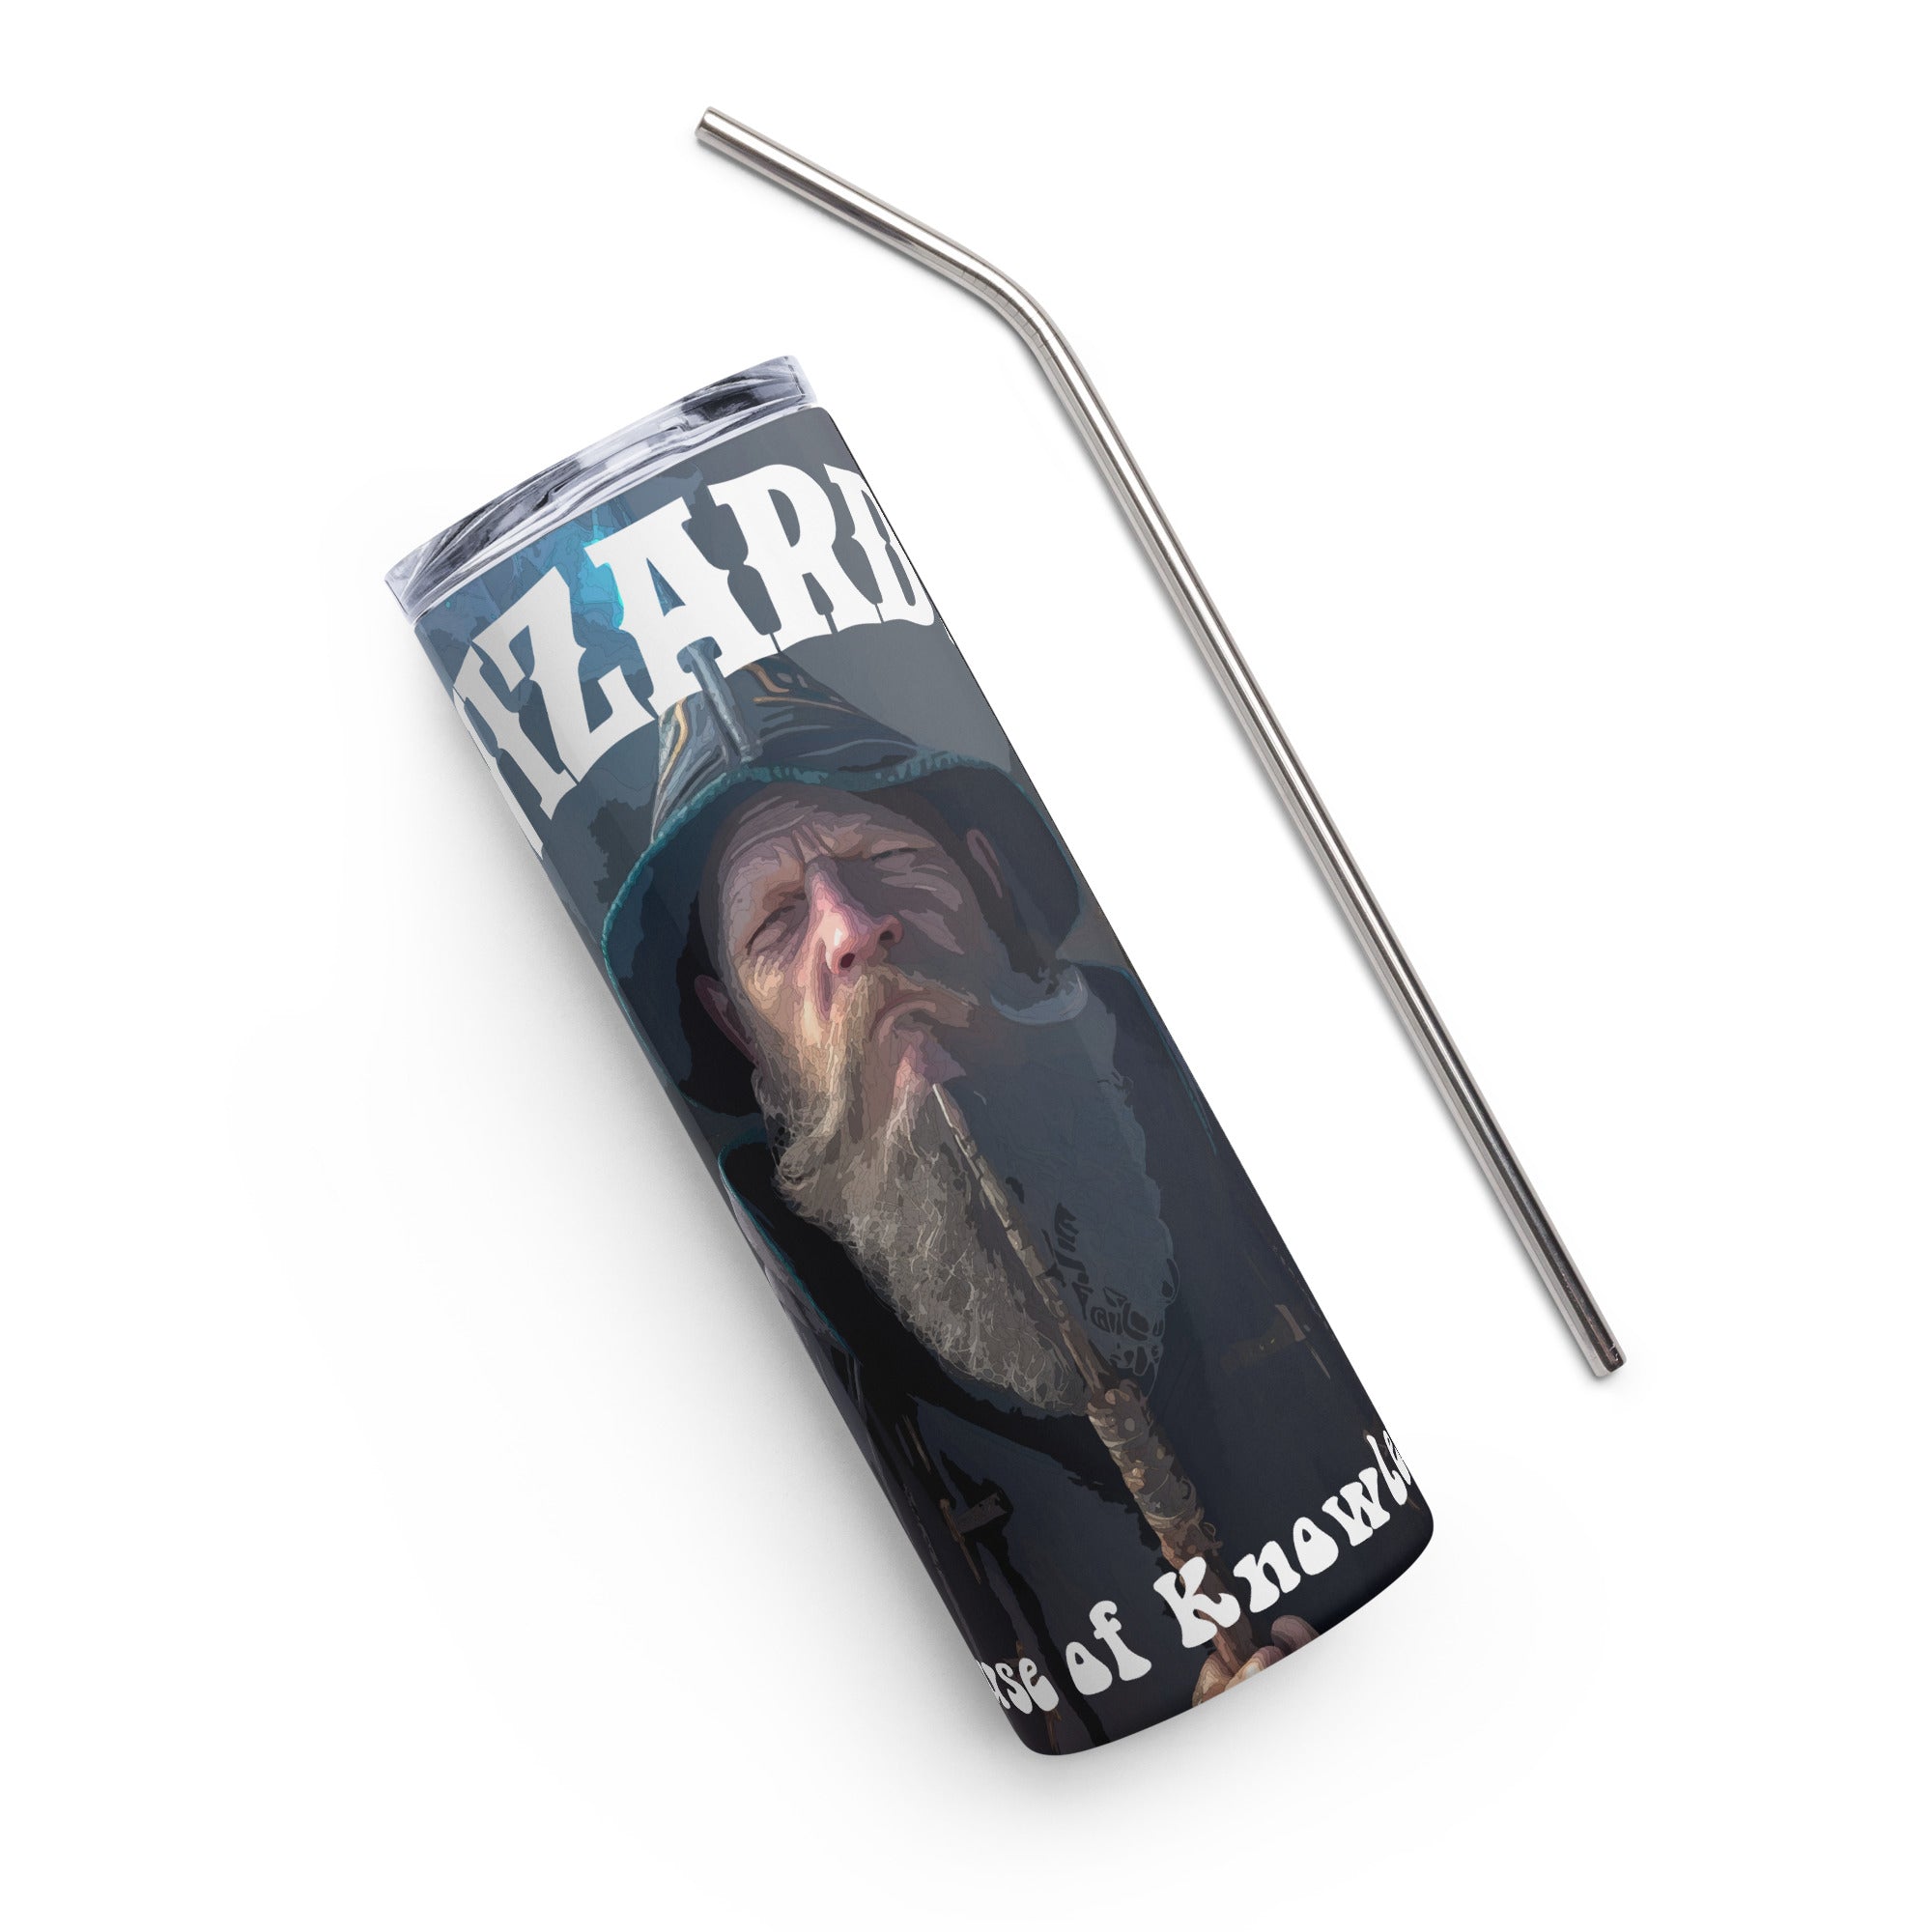 Wizards House of Knowledge Stainless steel tumbler